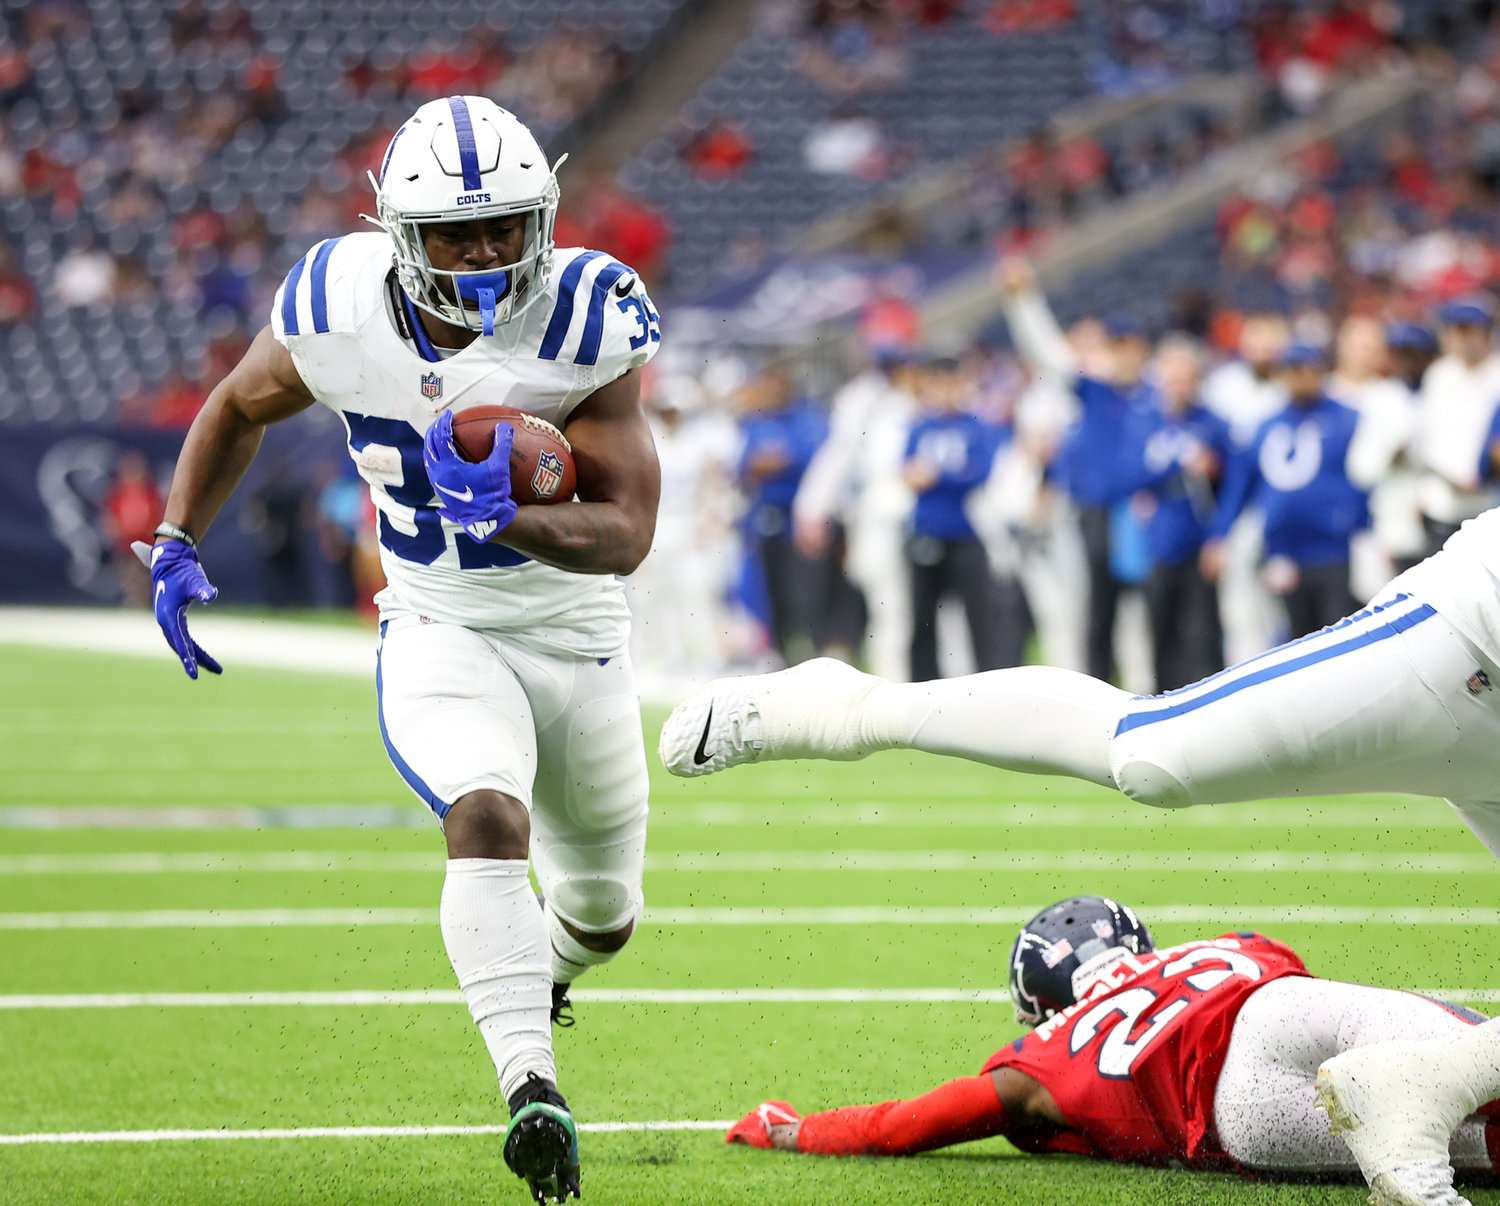 Indianapolis Colts running back Deon Jackson (35) carries the ball for a touchdown during an NFL game between the Texans and the Colts on December 5, 2021 in Houston, Texas. The Colts won, 31-0.